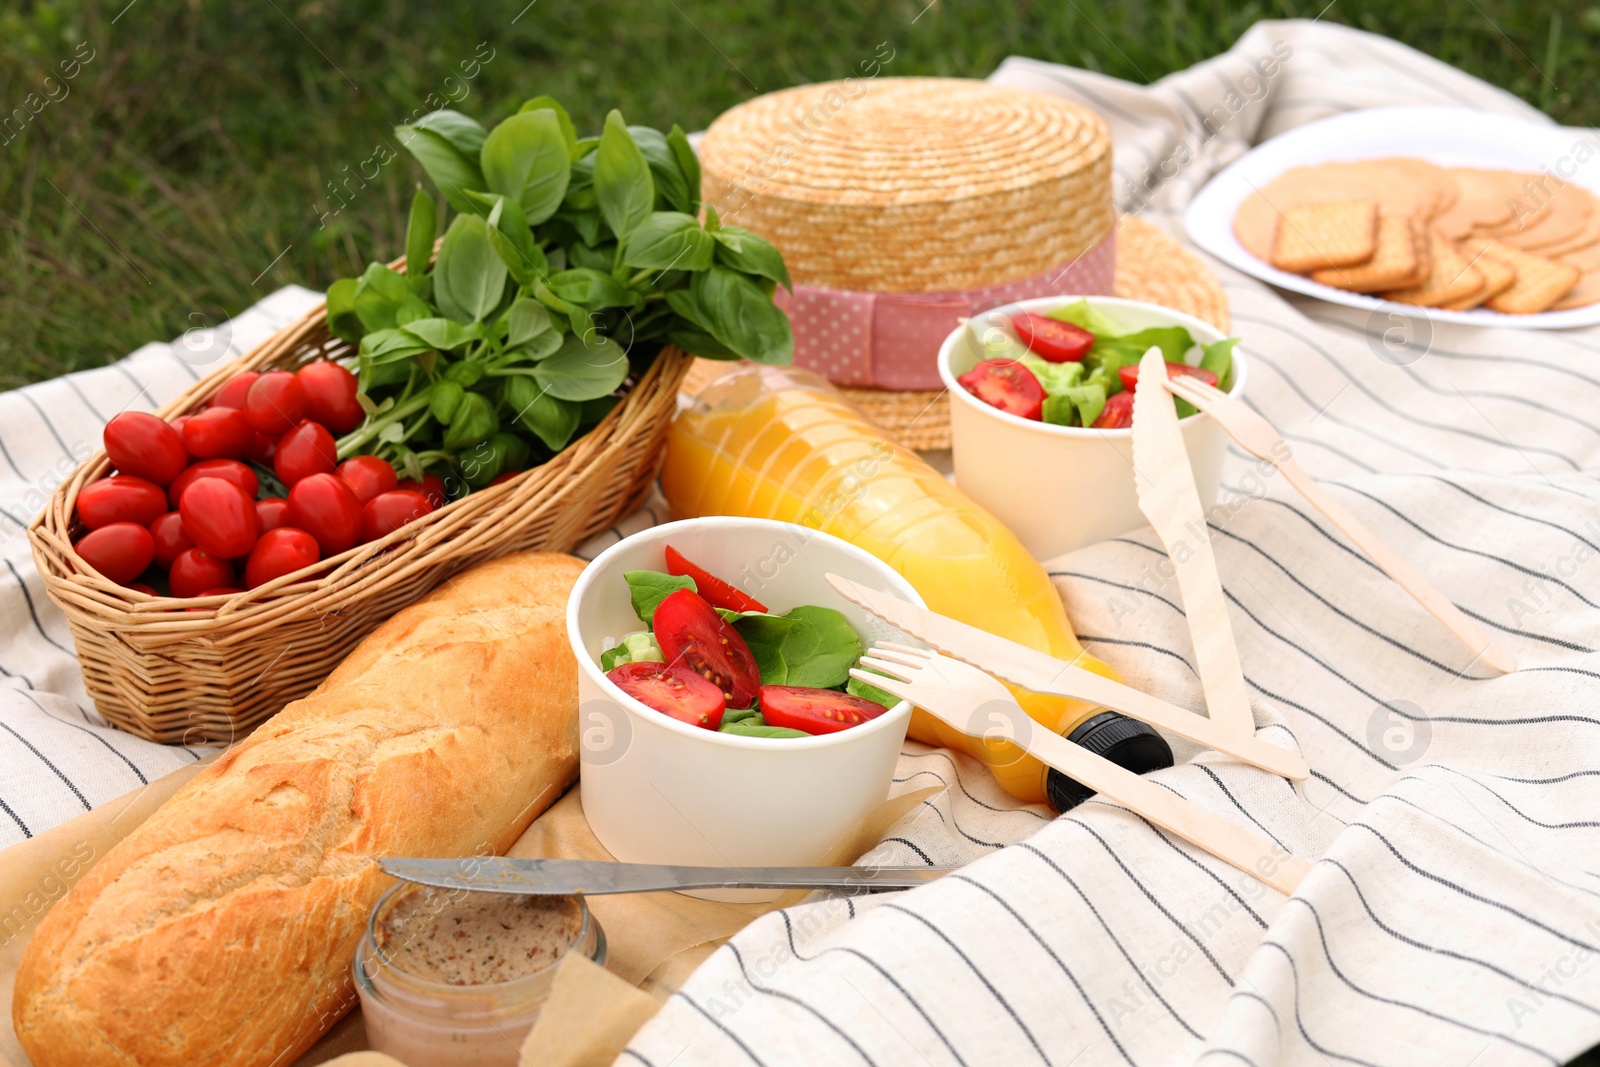 Photo of Picnic blanket with juice and food on green grass